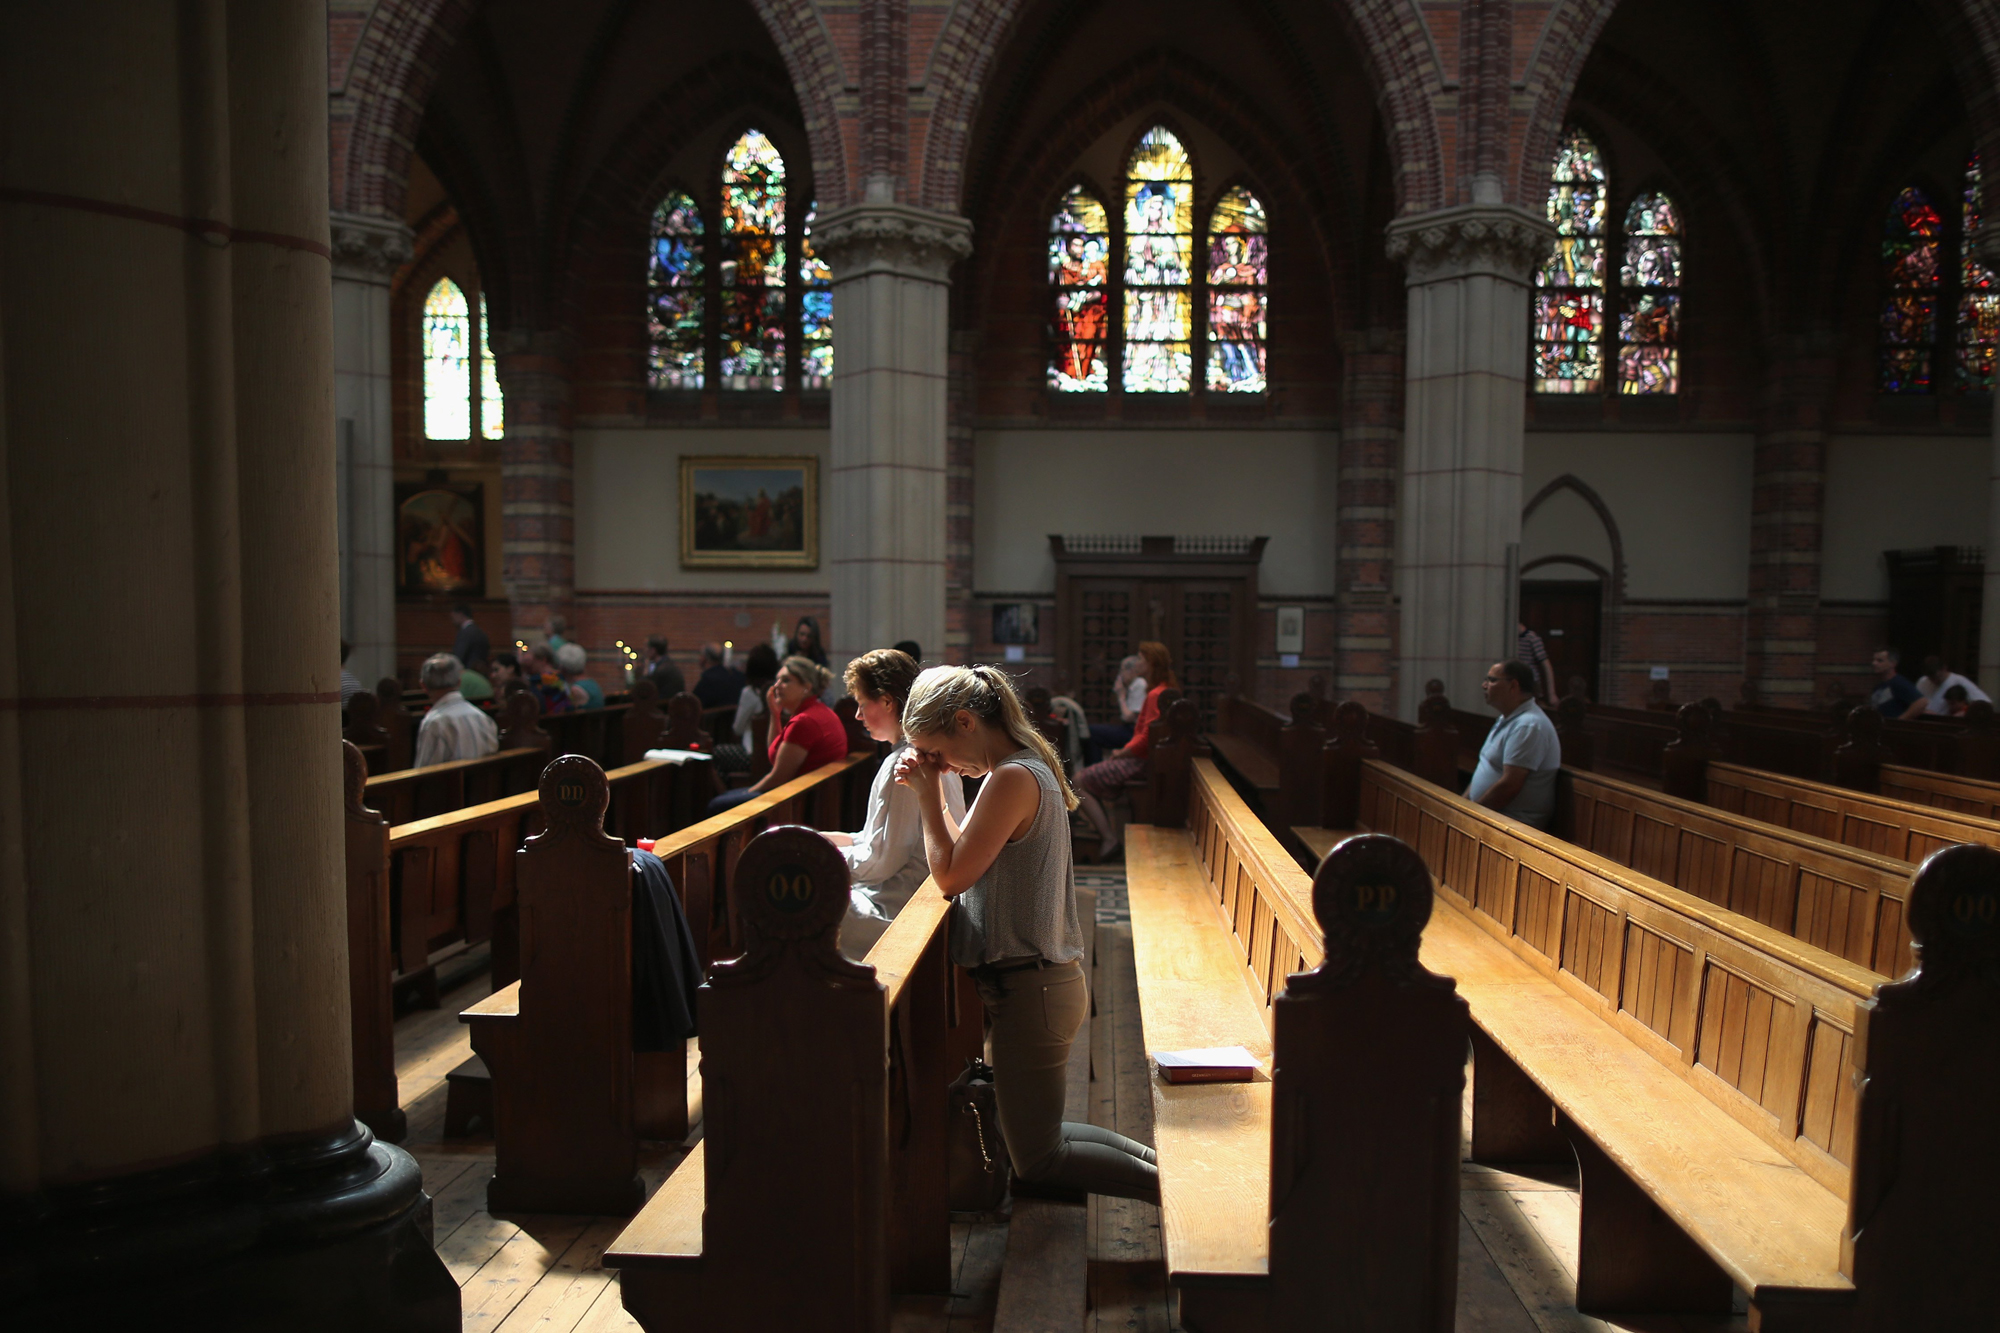 Local people pray during a special mass in Saint Vitus Church in memory of the victims of Malaysia Airlines flight MH17 on July 20, 2014 in Hilversum, Netherlands.